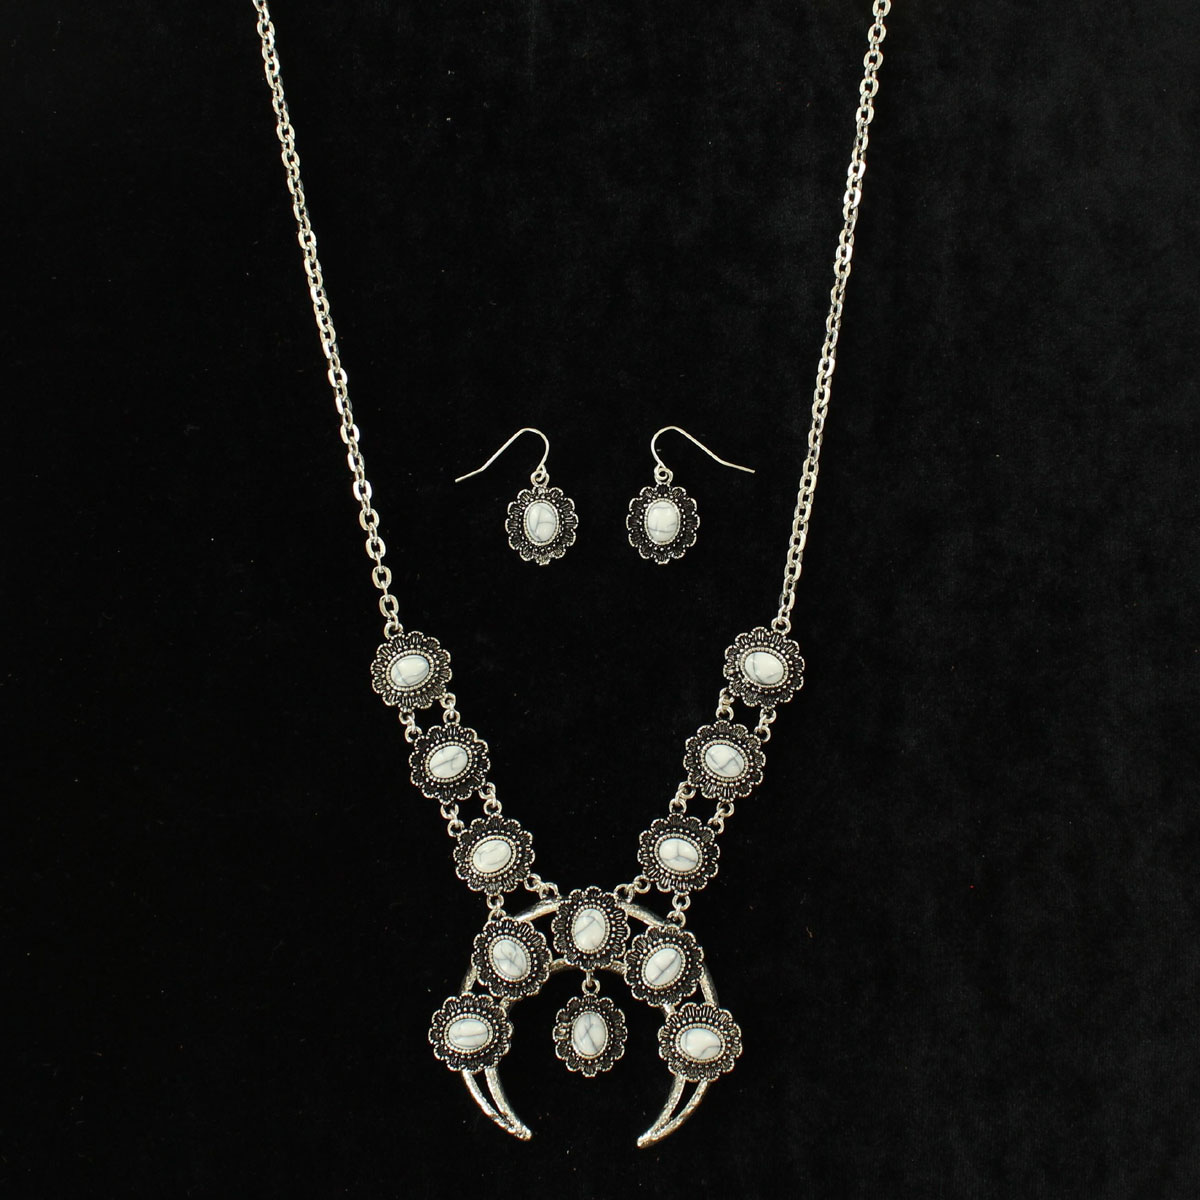 29173 Oval Stone Single Squash Blossom Necklace & Earrings Set, White - 28 To 30.87 In.